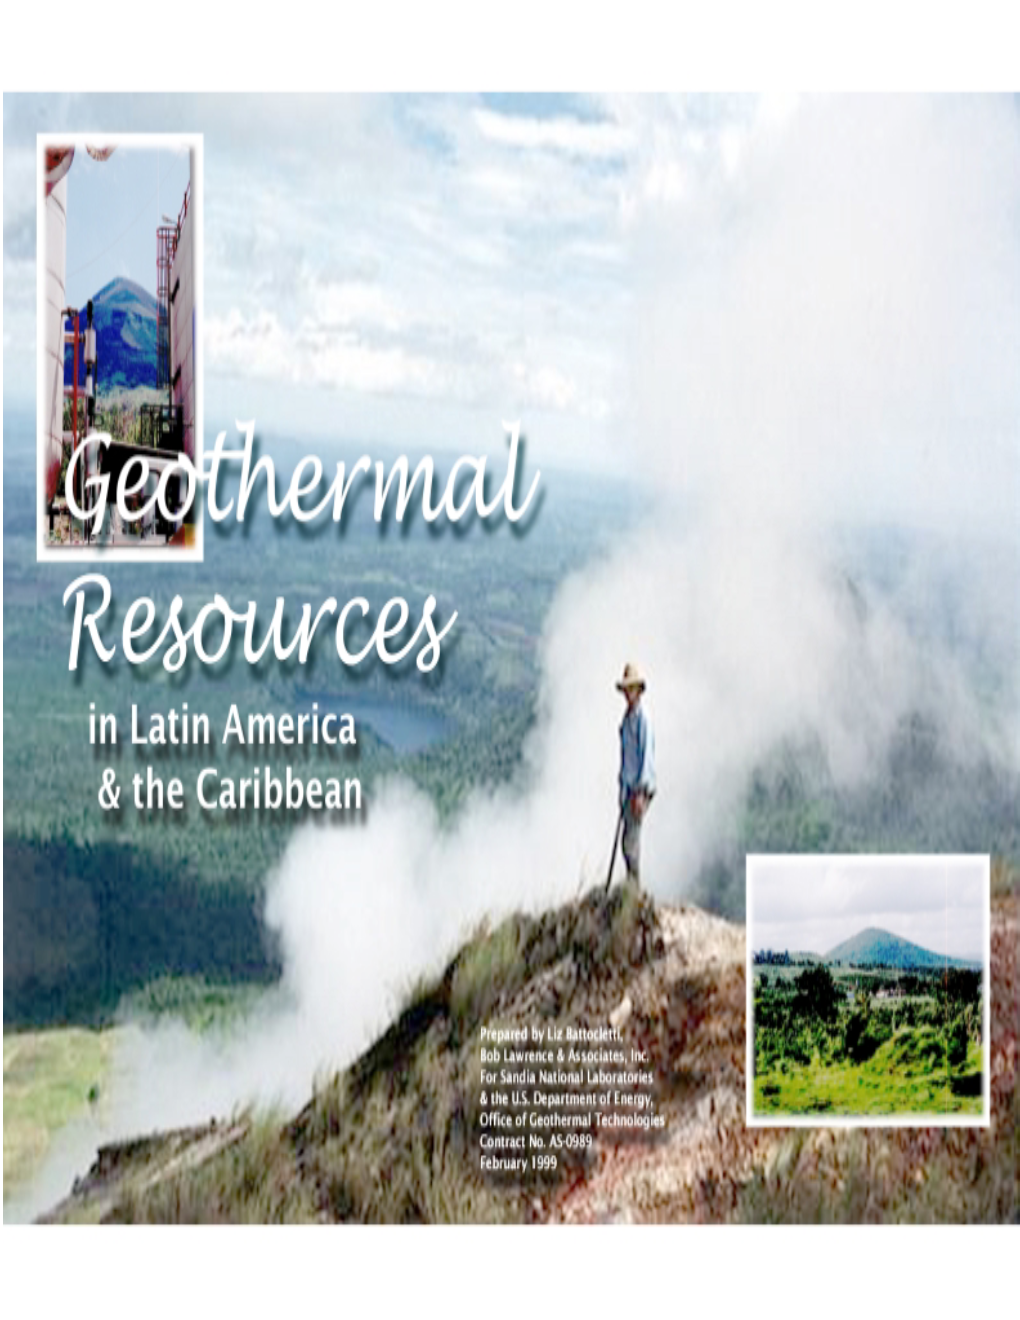 Geothermal Resources in Latin America and the Caribbean” Project